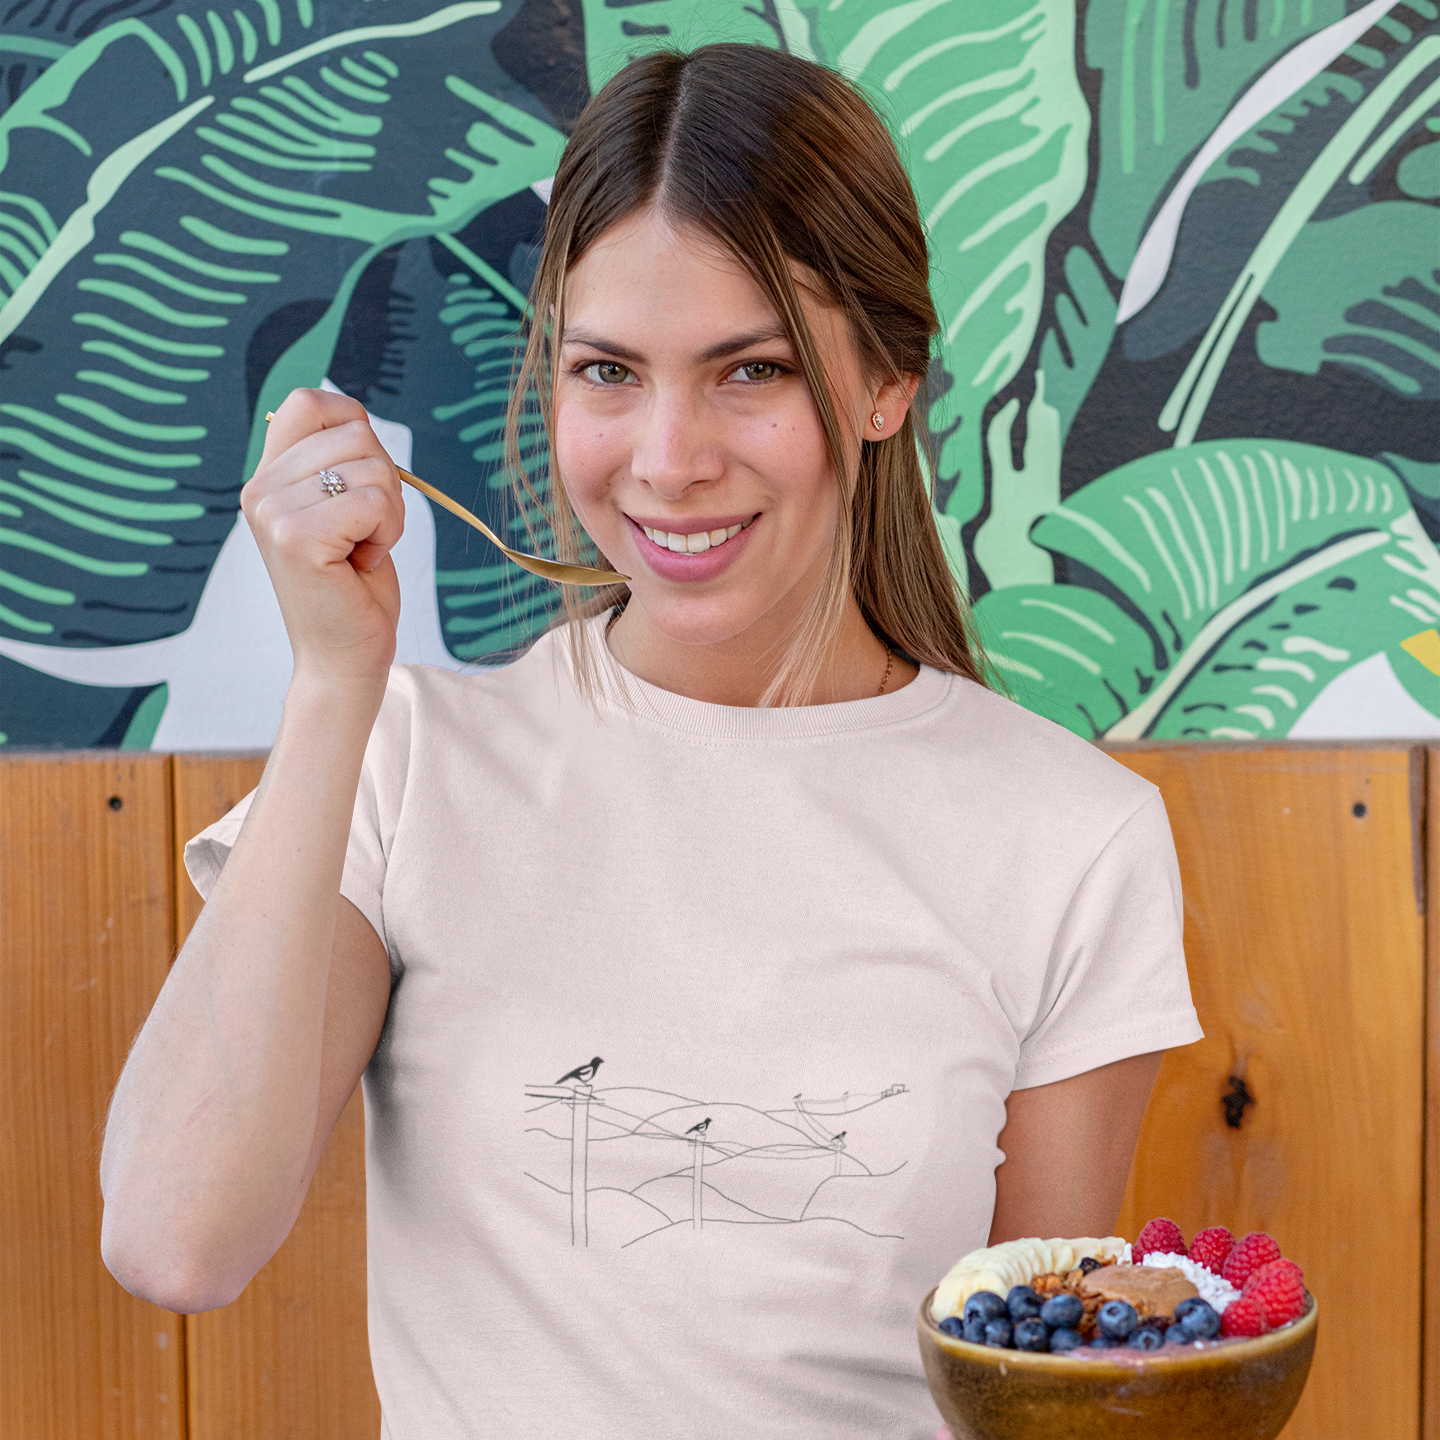 Magpies | 100% Organic Cotton T Shirt worn by a woman